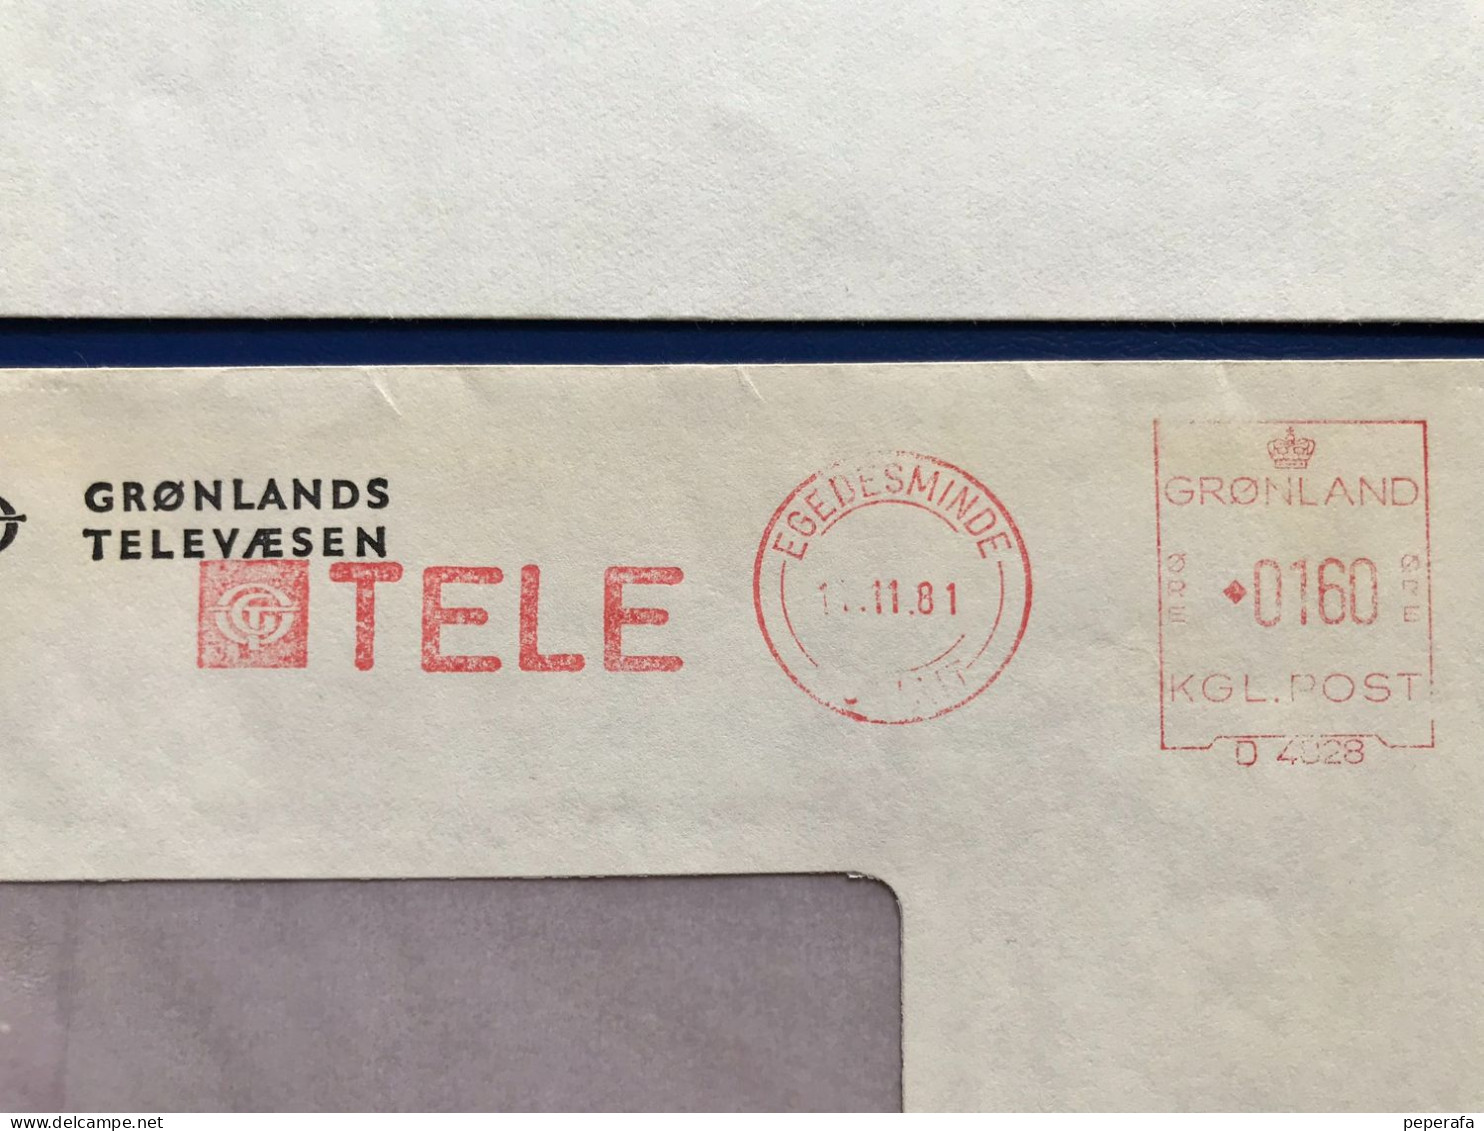 Denmark, Greenland GRØNLAND, 2 COVER POSTAGE METER, FRANQUEO MECÁNICO (FRANCOFILIA 2) - Marcophilie